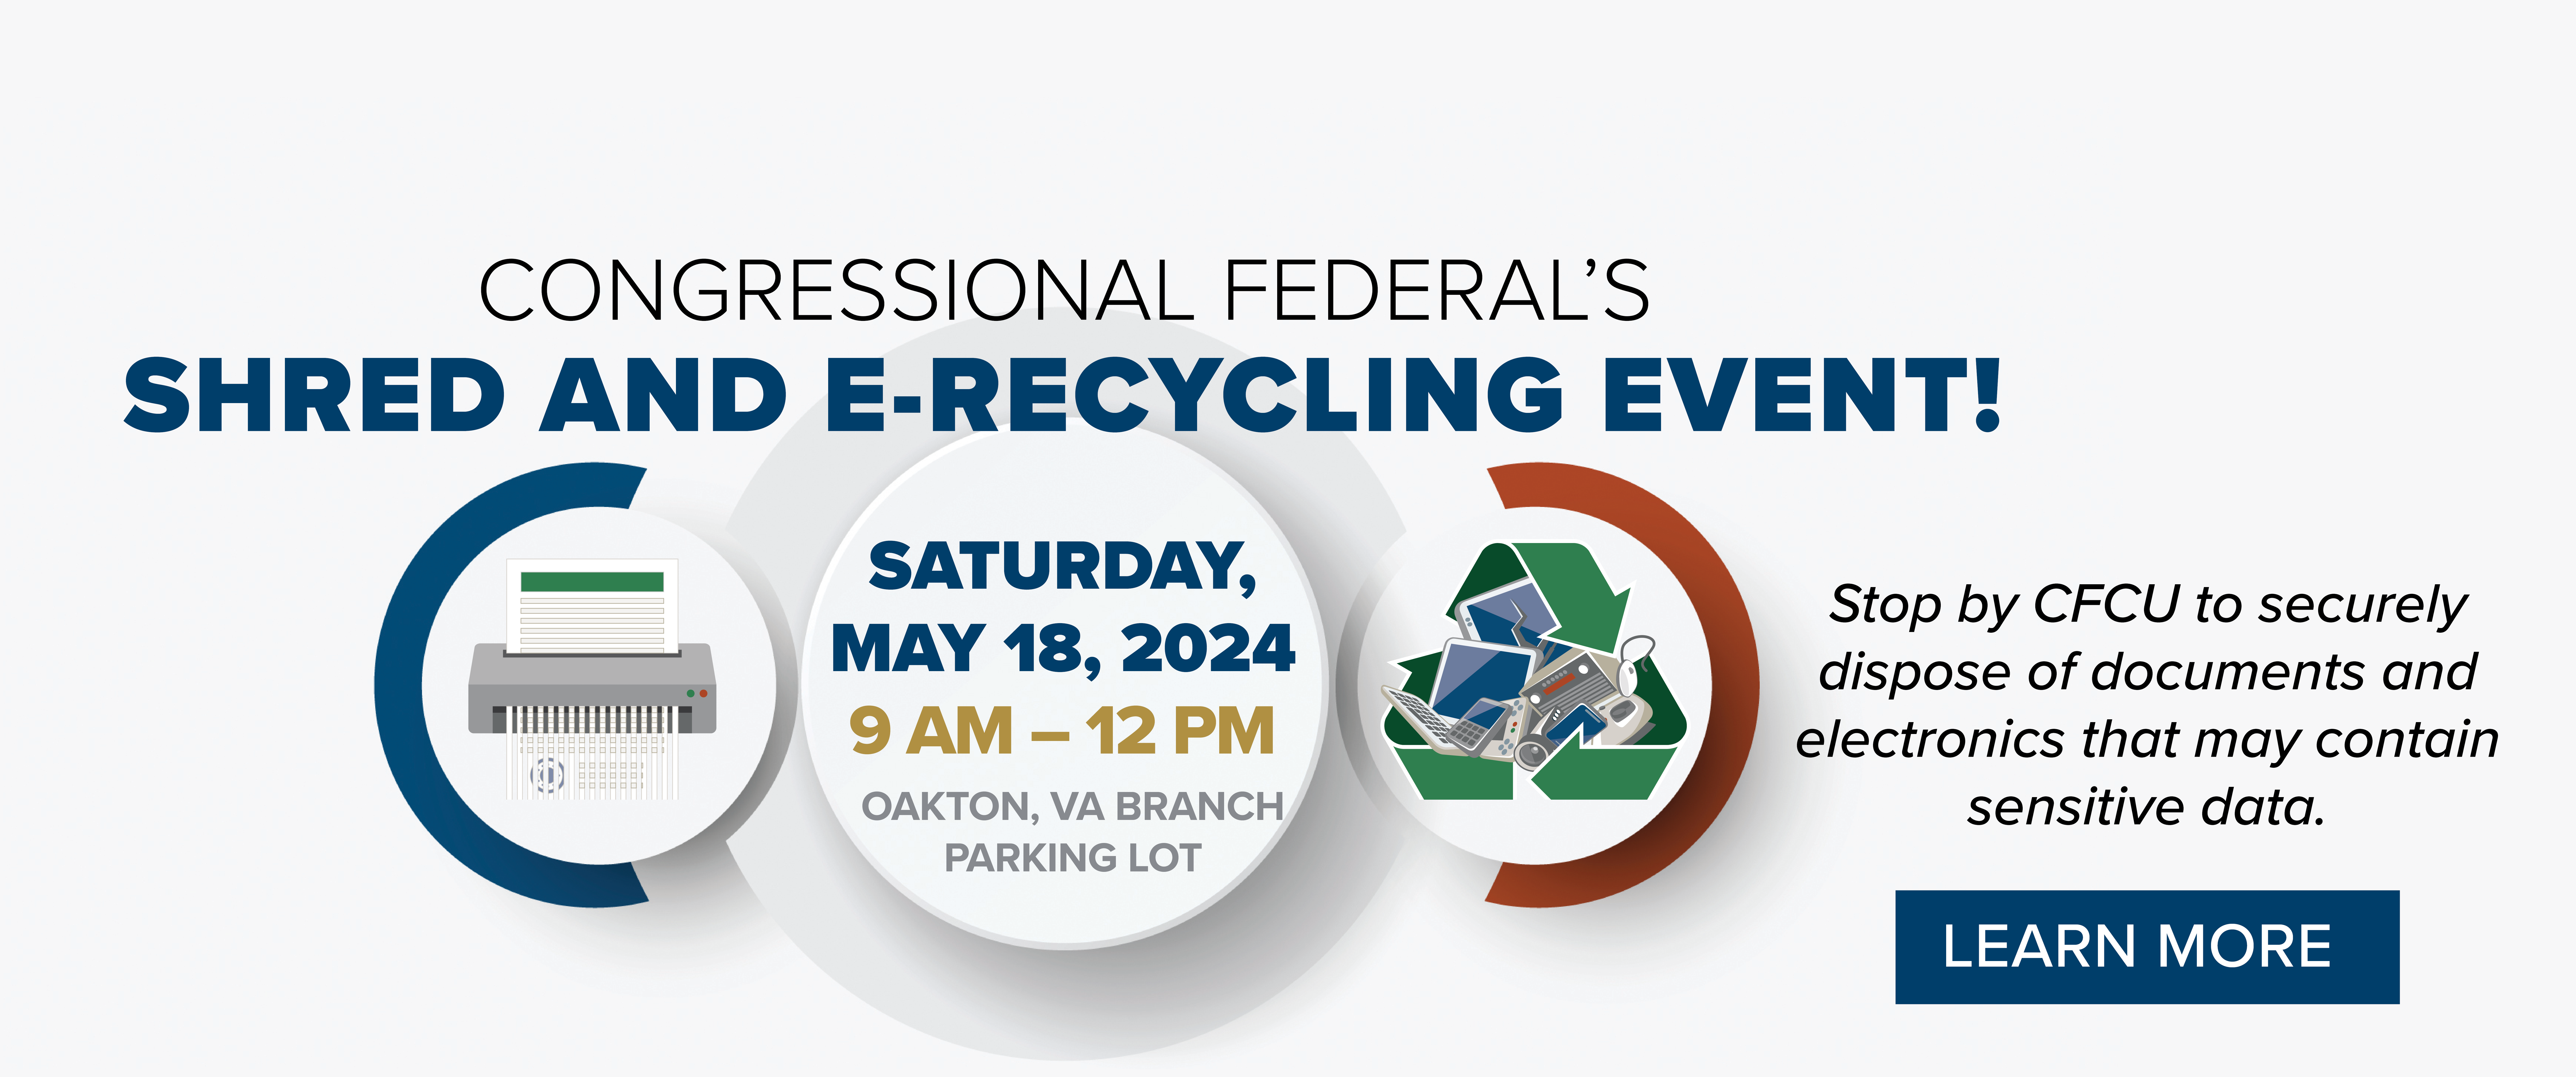 CONGRESSIONAL FEDERAL'S SHRED AND  E-RECYCLING EVENT! SATURDAY, MAY 18, 2024 9 AM - 12 PM OAKTON, VA BRANCH PARKING LOT Stop by CFCU to securely dispose of documents and electronics that may contain sensitive data. Learn more